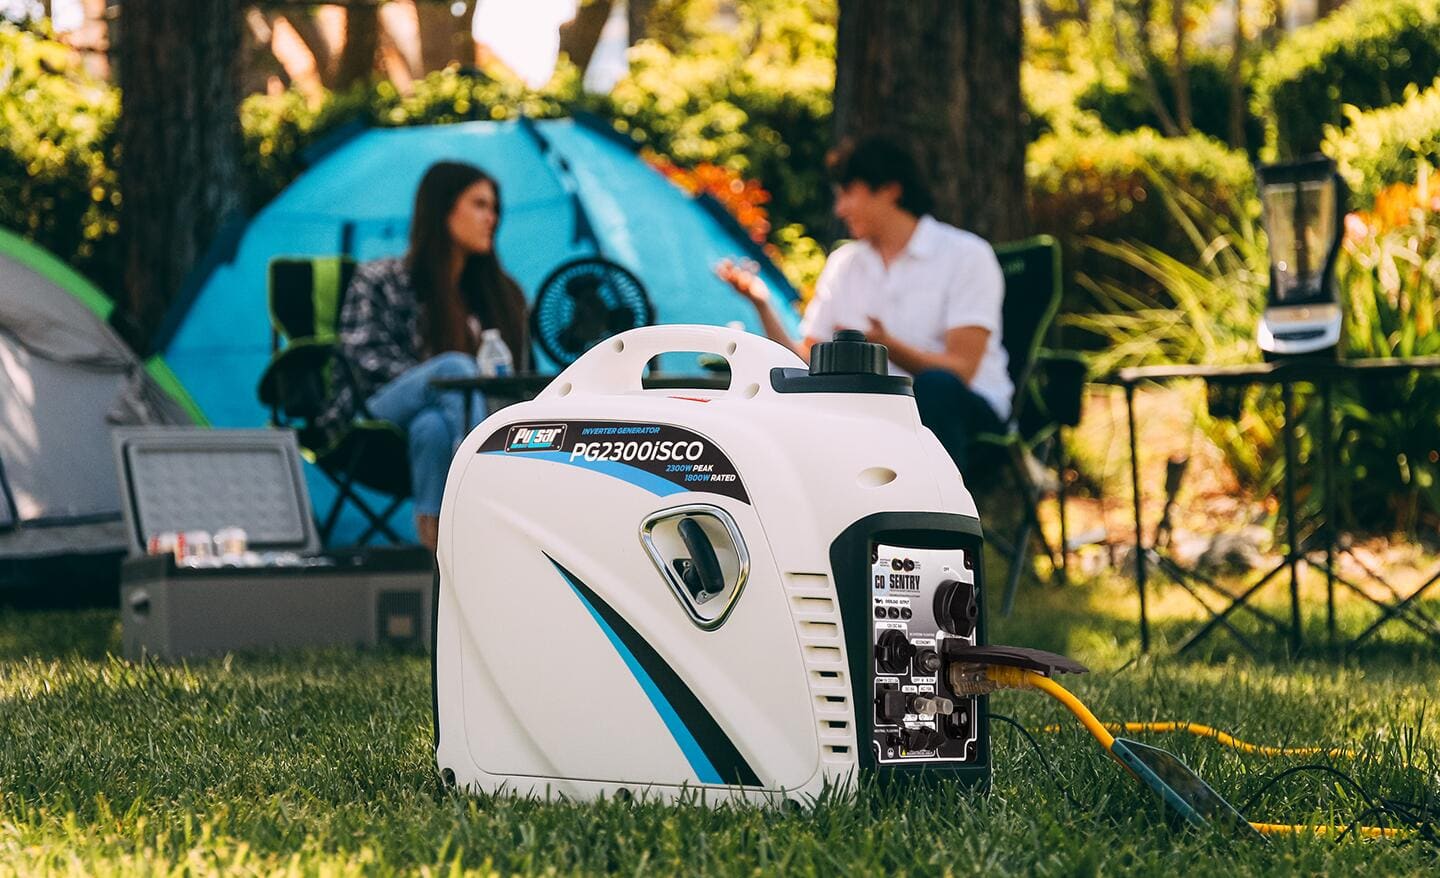 A portable generator sits in front of a woman and a man at a campsite.